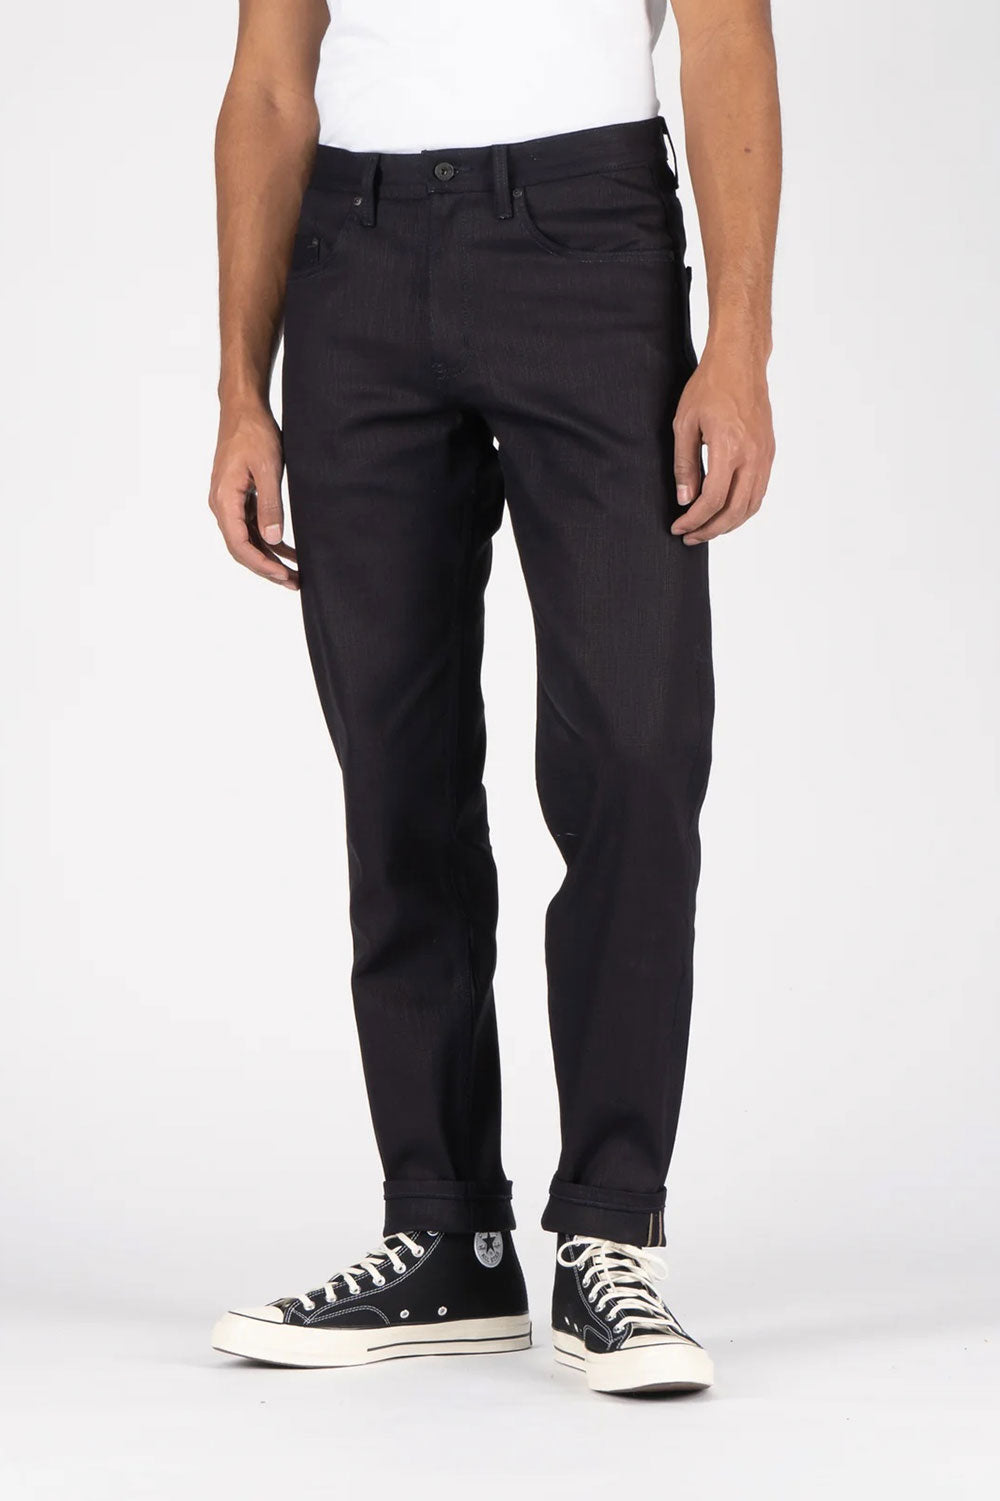 Naked & Famous - Easy Guy - Midnight Slub Stretch Selvedge - Front